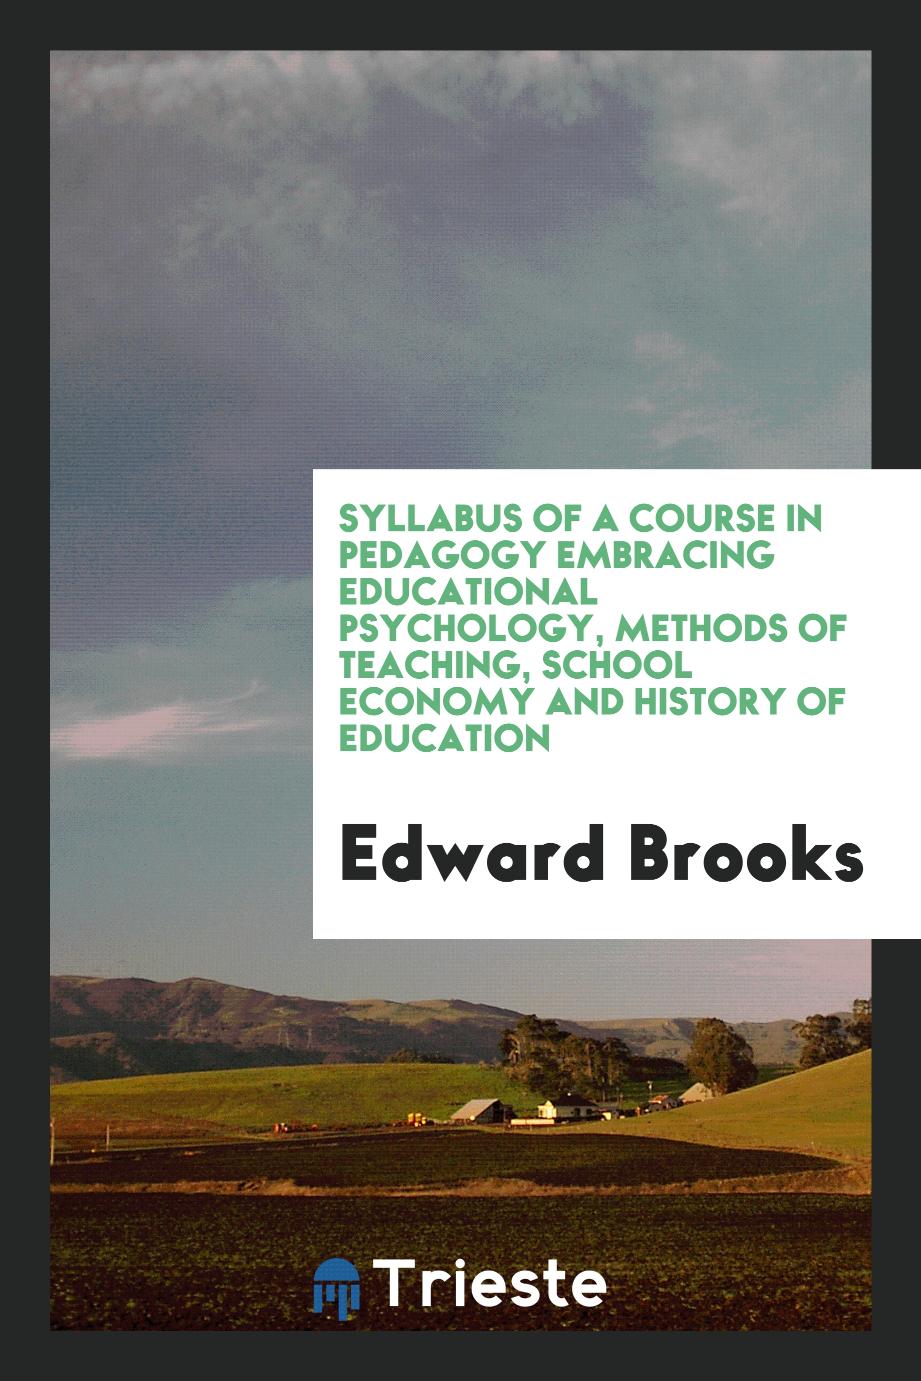 Syllabus of a Course in Pedagogy Embracing Educational Psychology, Methods of Teaching, School Economy and History of Education